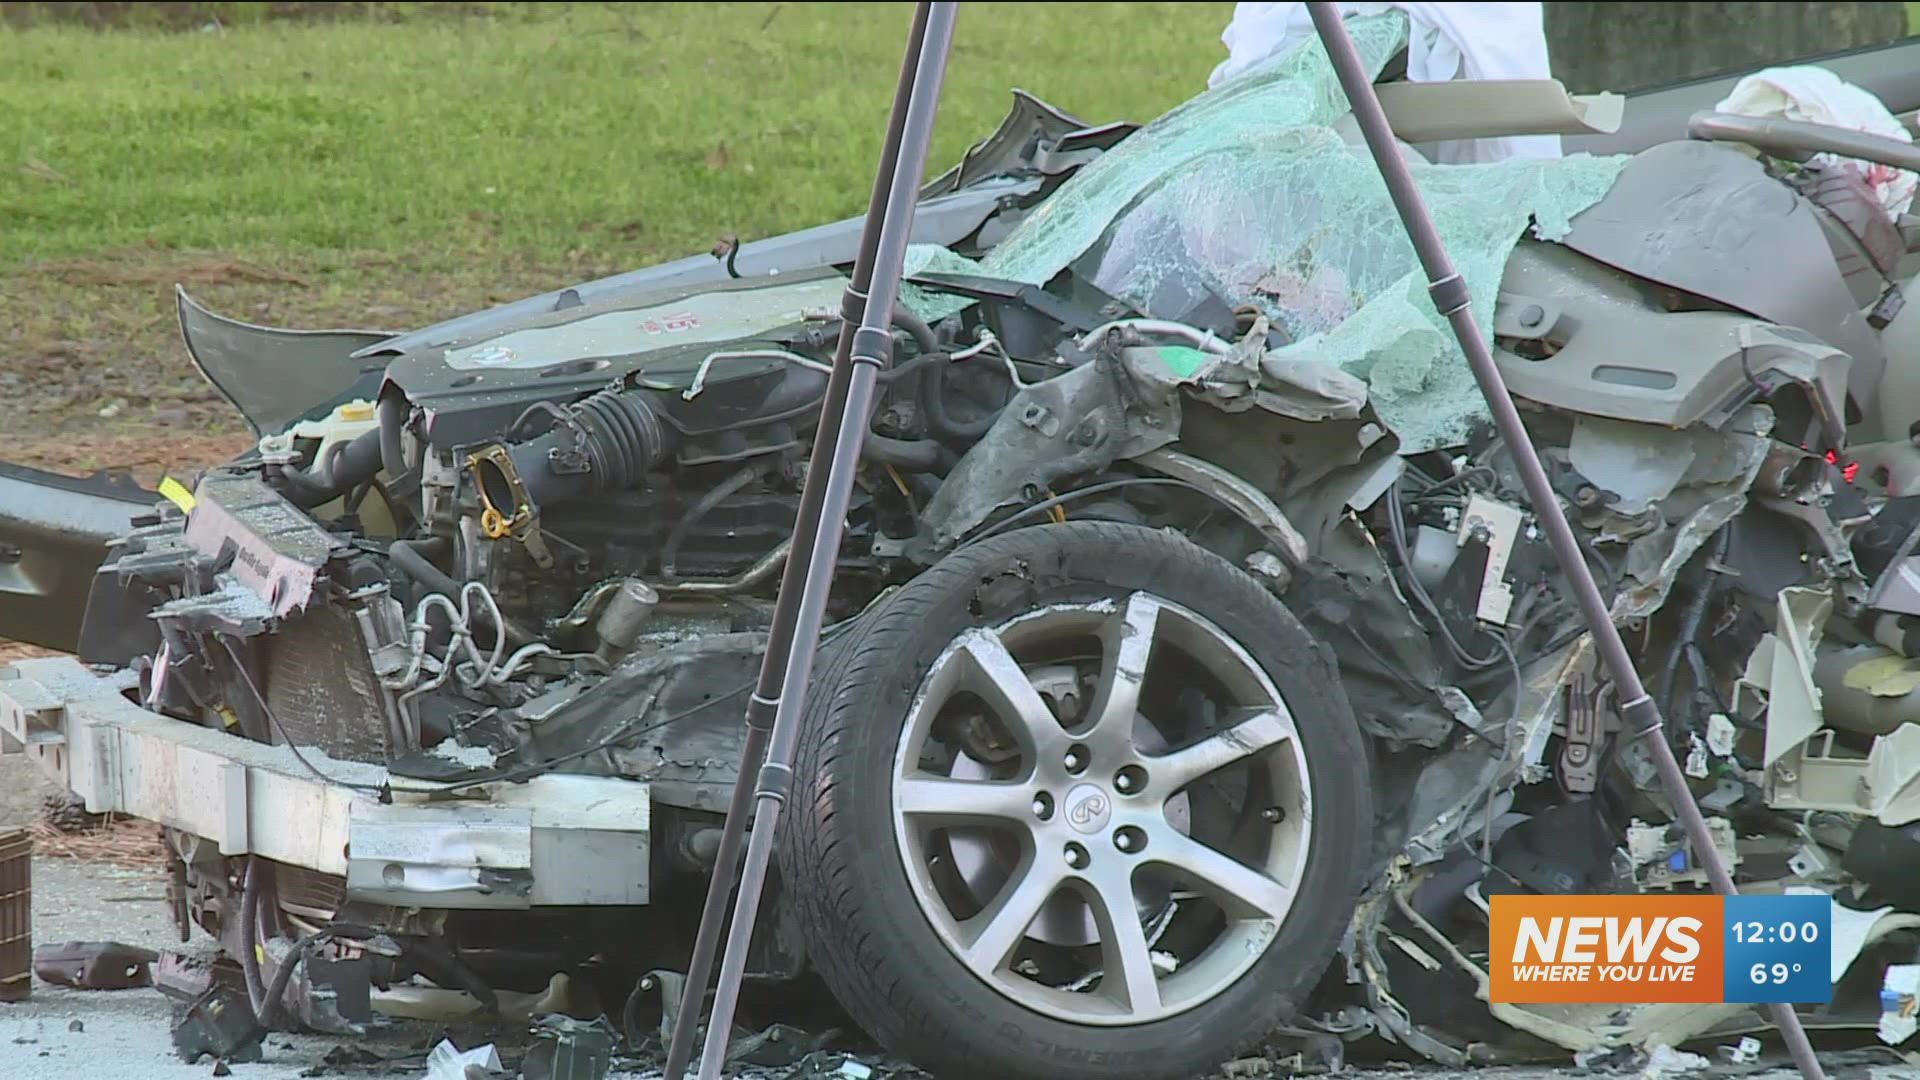 39-year-old Alejandro Carrillo is facing charges of negligent homicide, DWI and second-degree battery in connection to the crash.